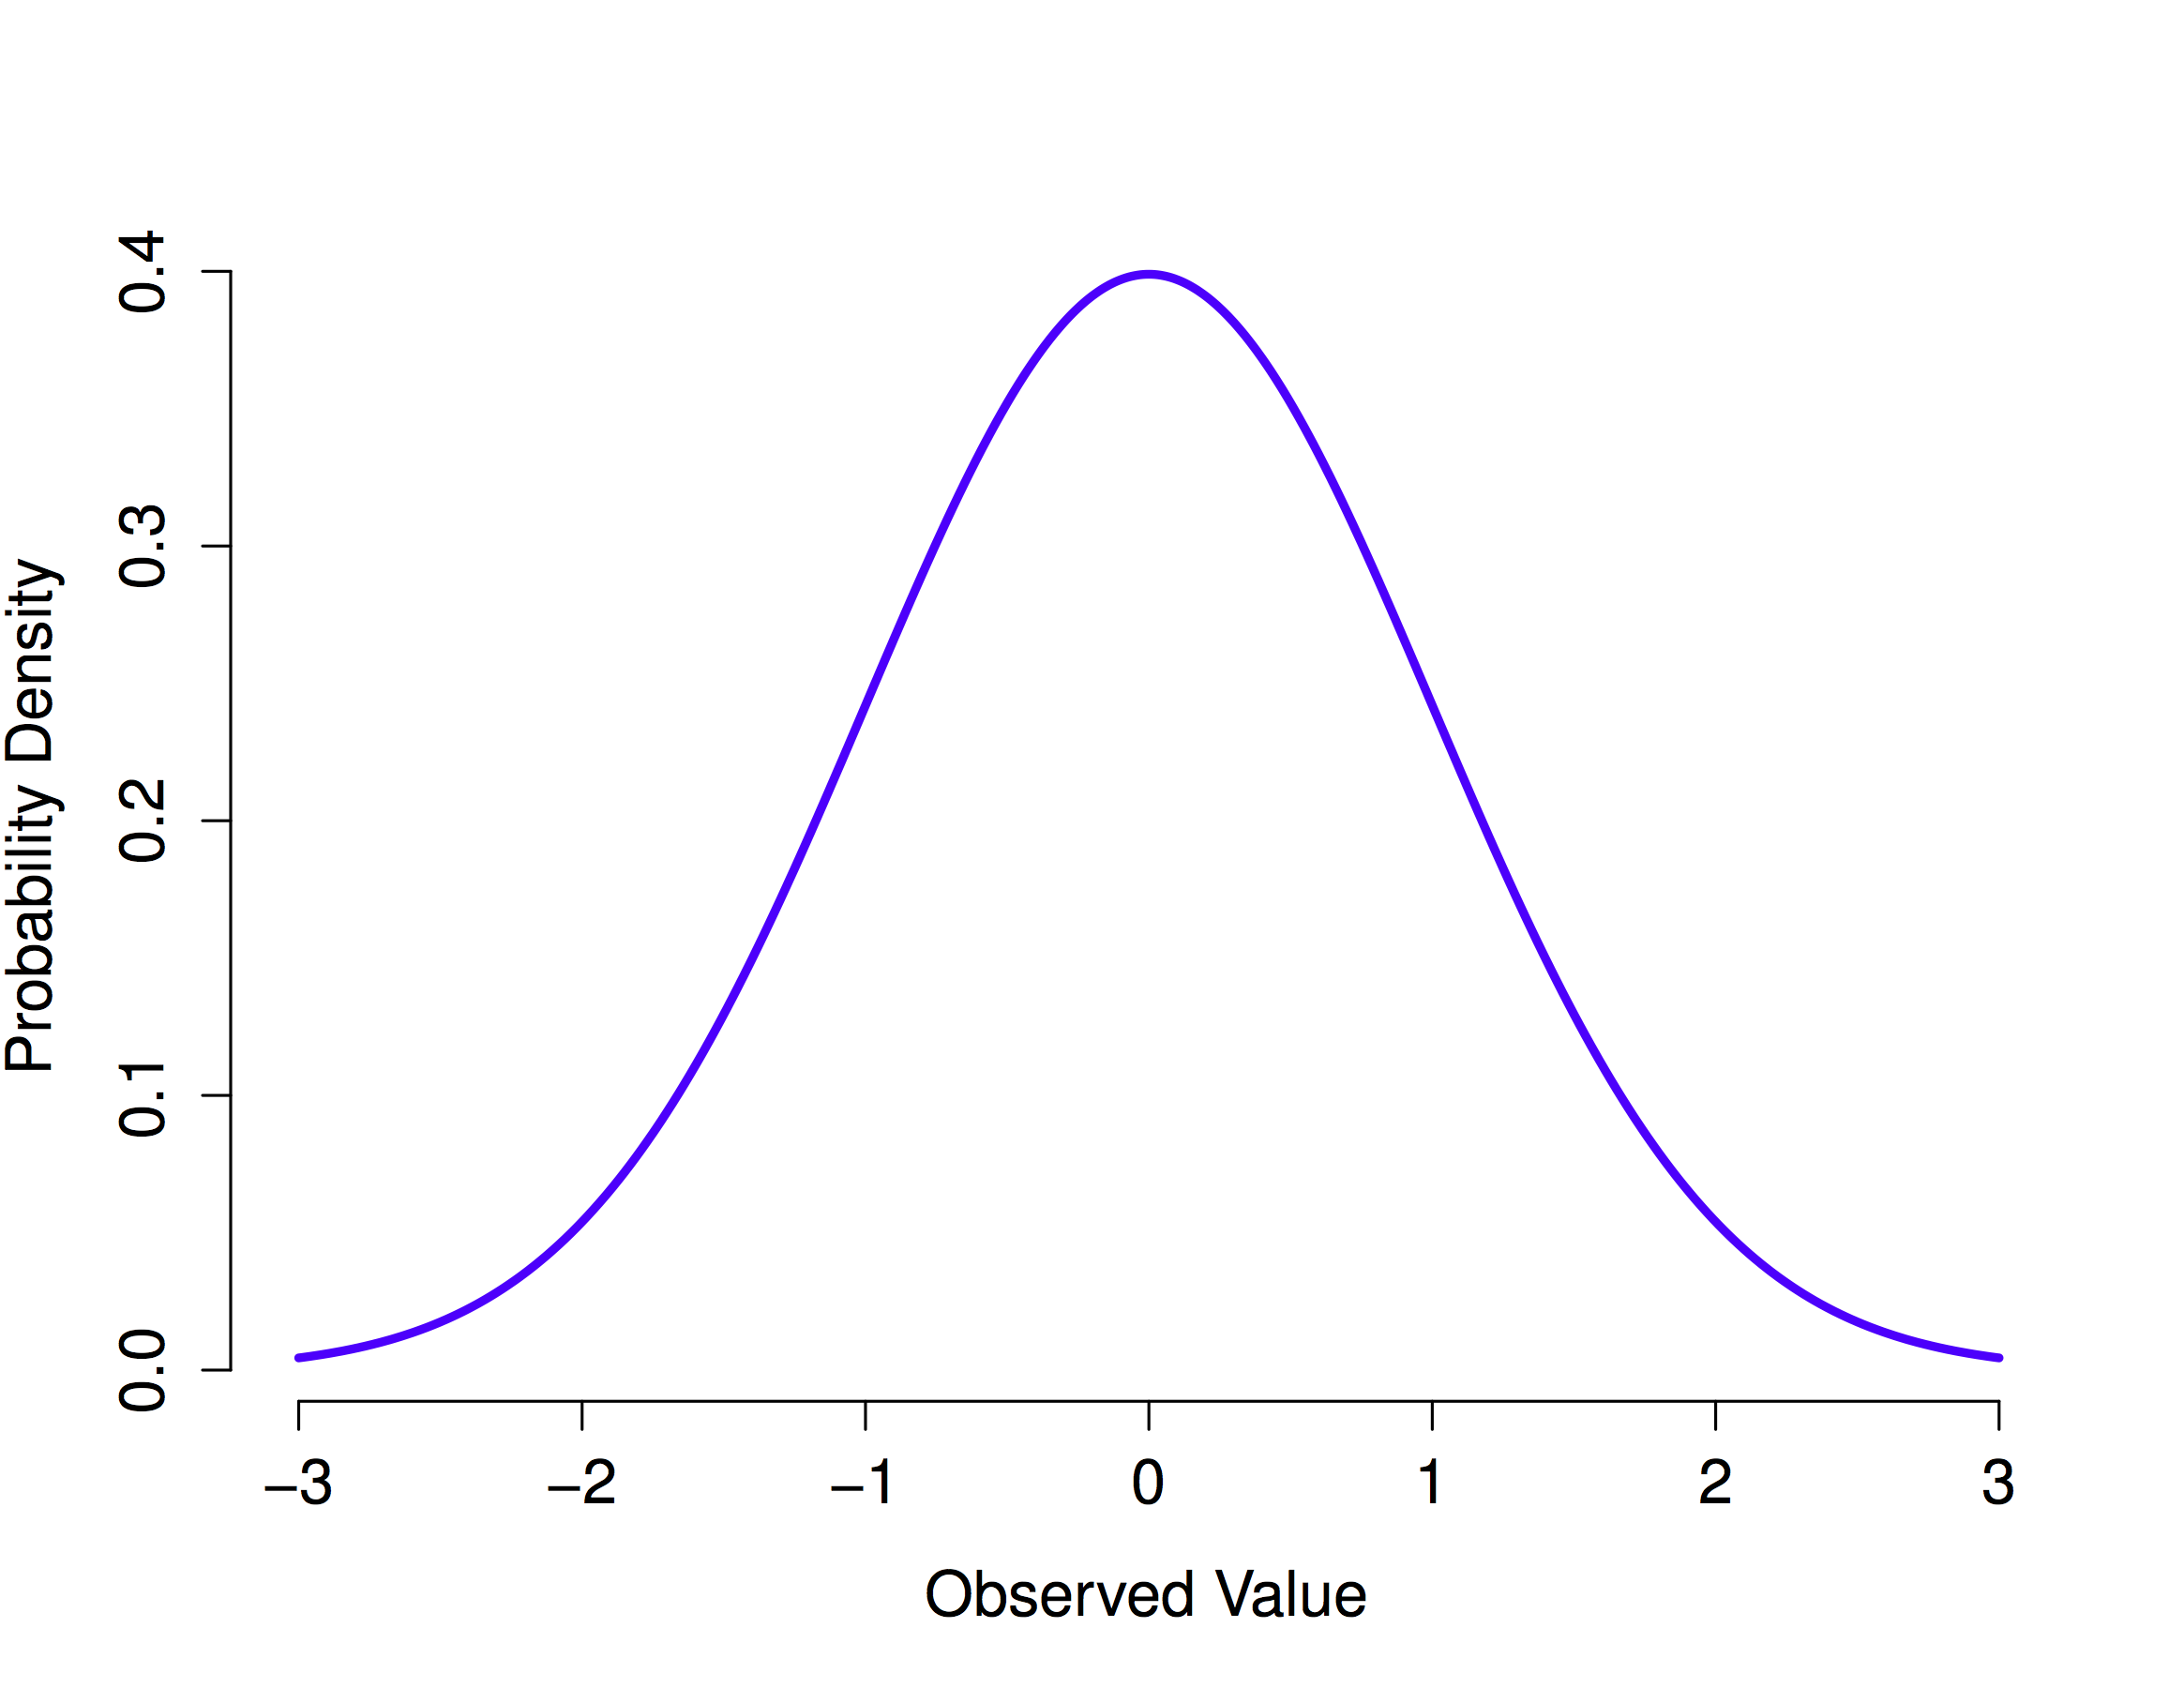 The normal distribution with mean = 0 and standard deviation = 1. The x-axis corresponds to the value of some variable, and the y-axis tells us something about how likely we are to observe that value. However, notice that the y-axis is labelled Probability Density and not Probability. There is a subtle and somewhat frustrating characteristic of continuous distributions that makes the y axis behave a bit oddly: the height of the curve here isn't actually the probability of observing a particular x value. On the other hand, it is true that the heights of the curve tells you which x values are more likely (the higher ones!).